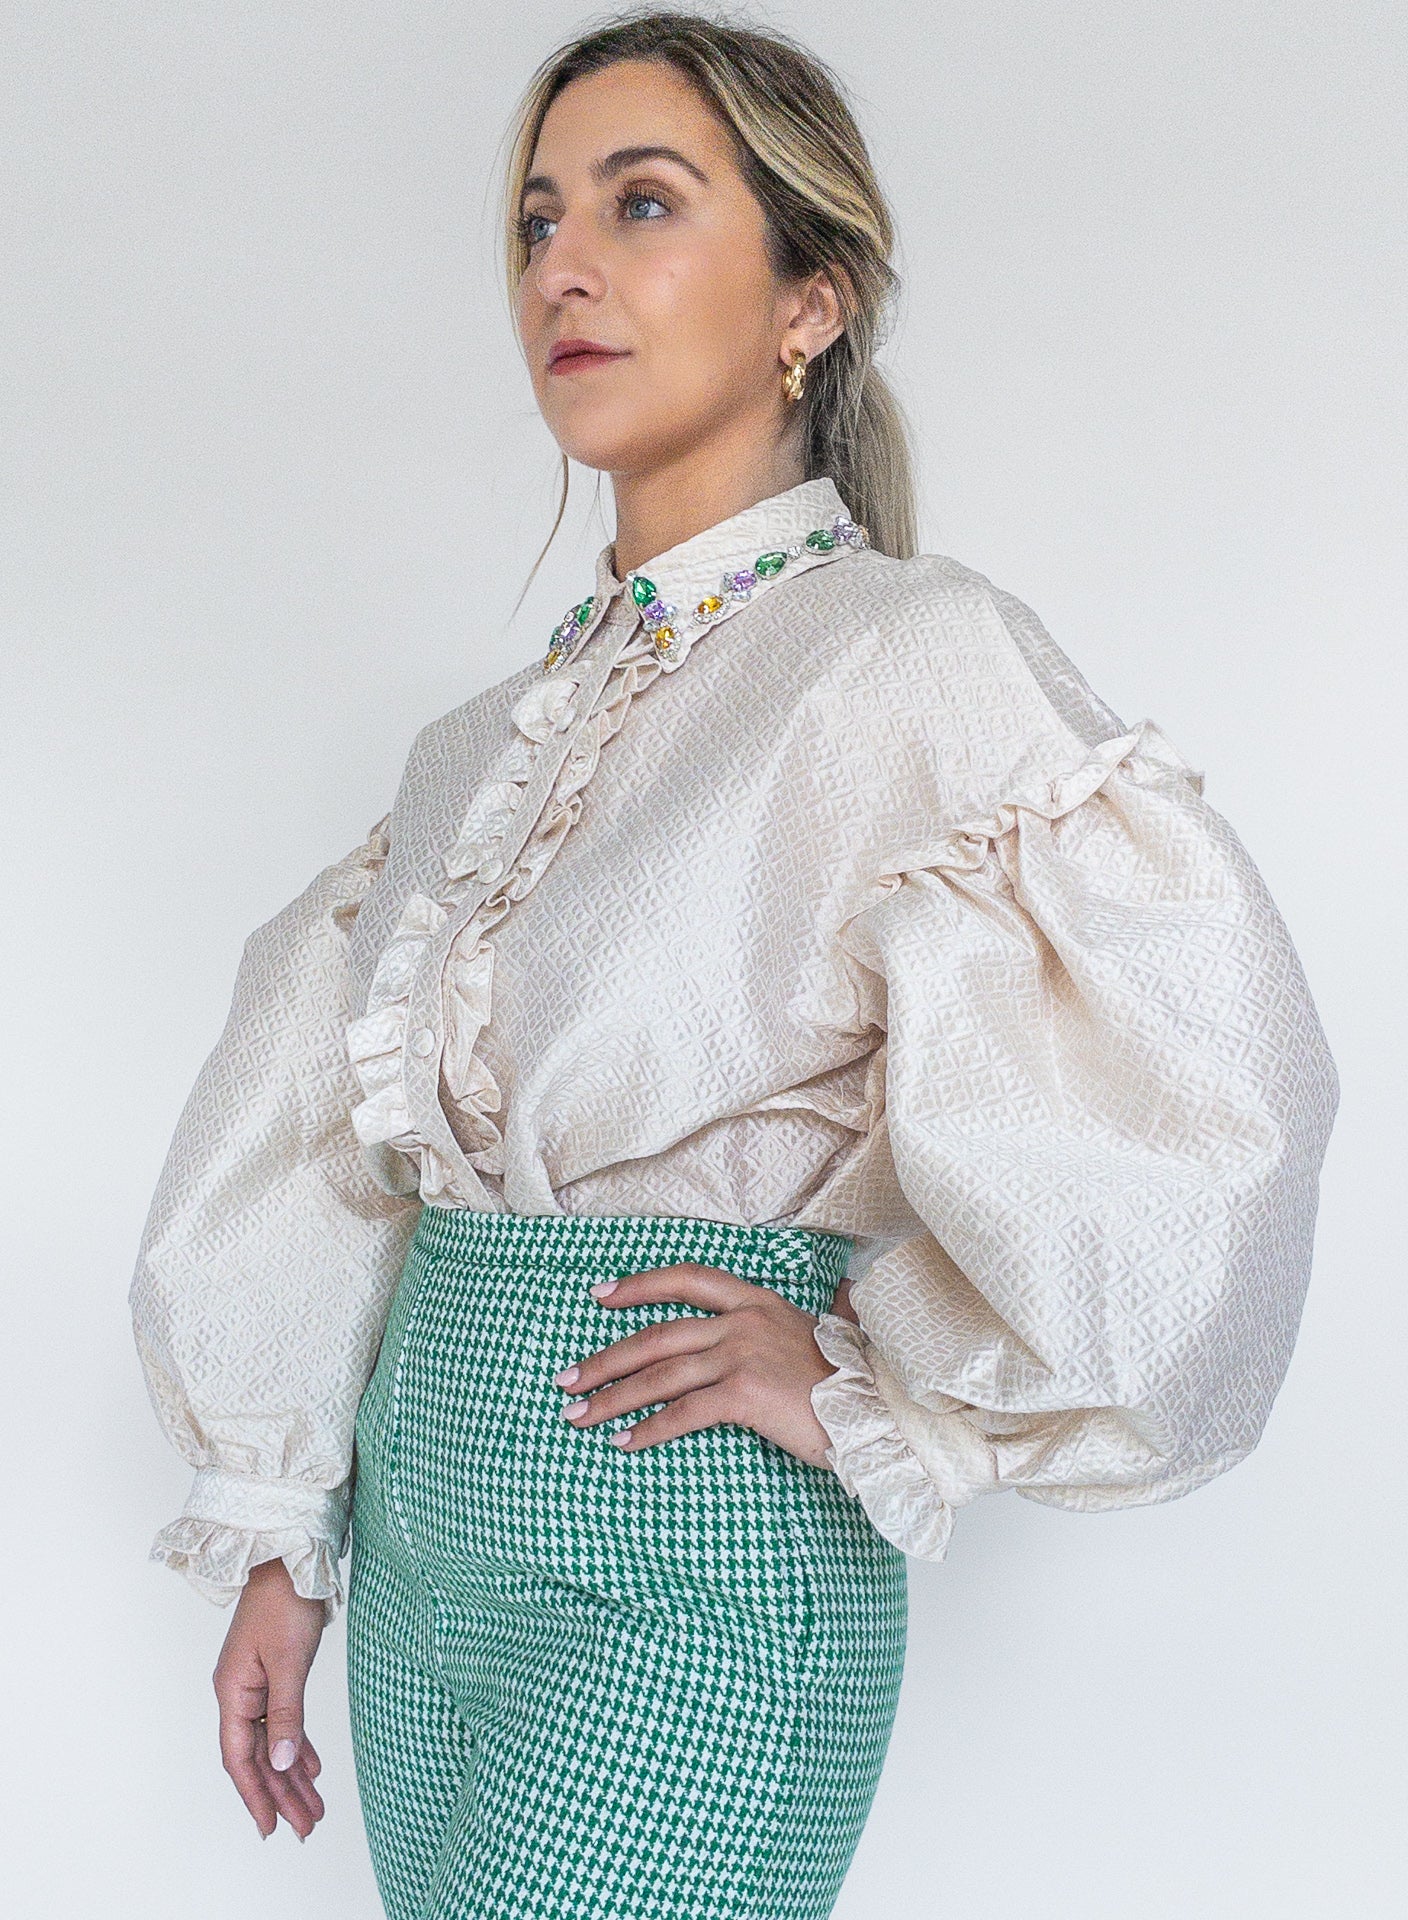 sister jane, lady jewel collar shirt, jewel collar, women&#39;s blouse, fashion, apparel, ethically made, slow fashion, curate, shopthecurate